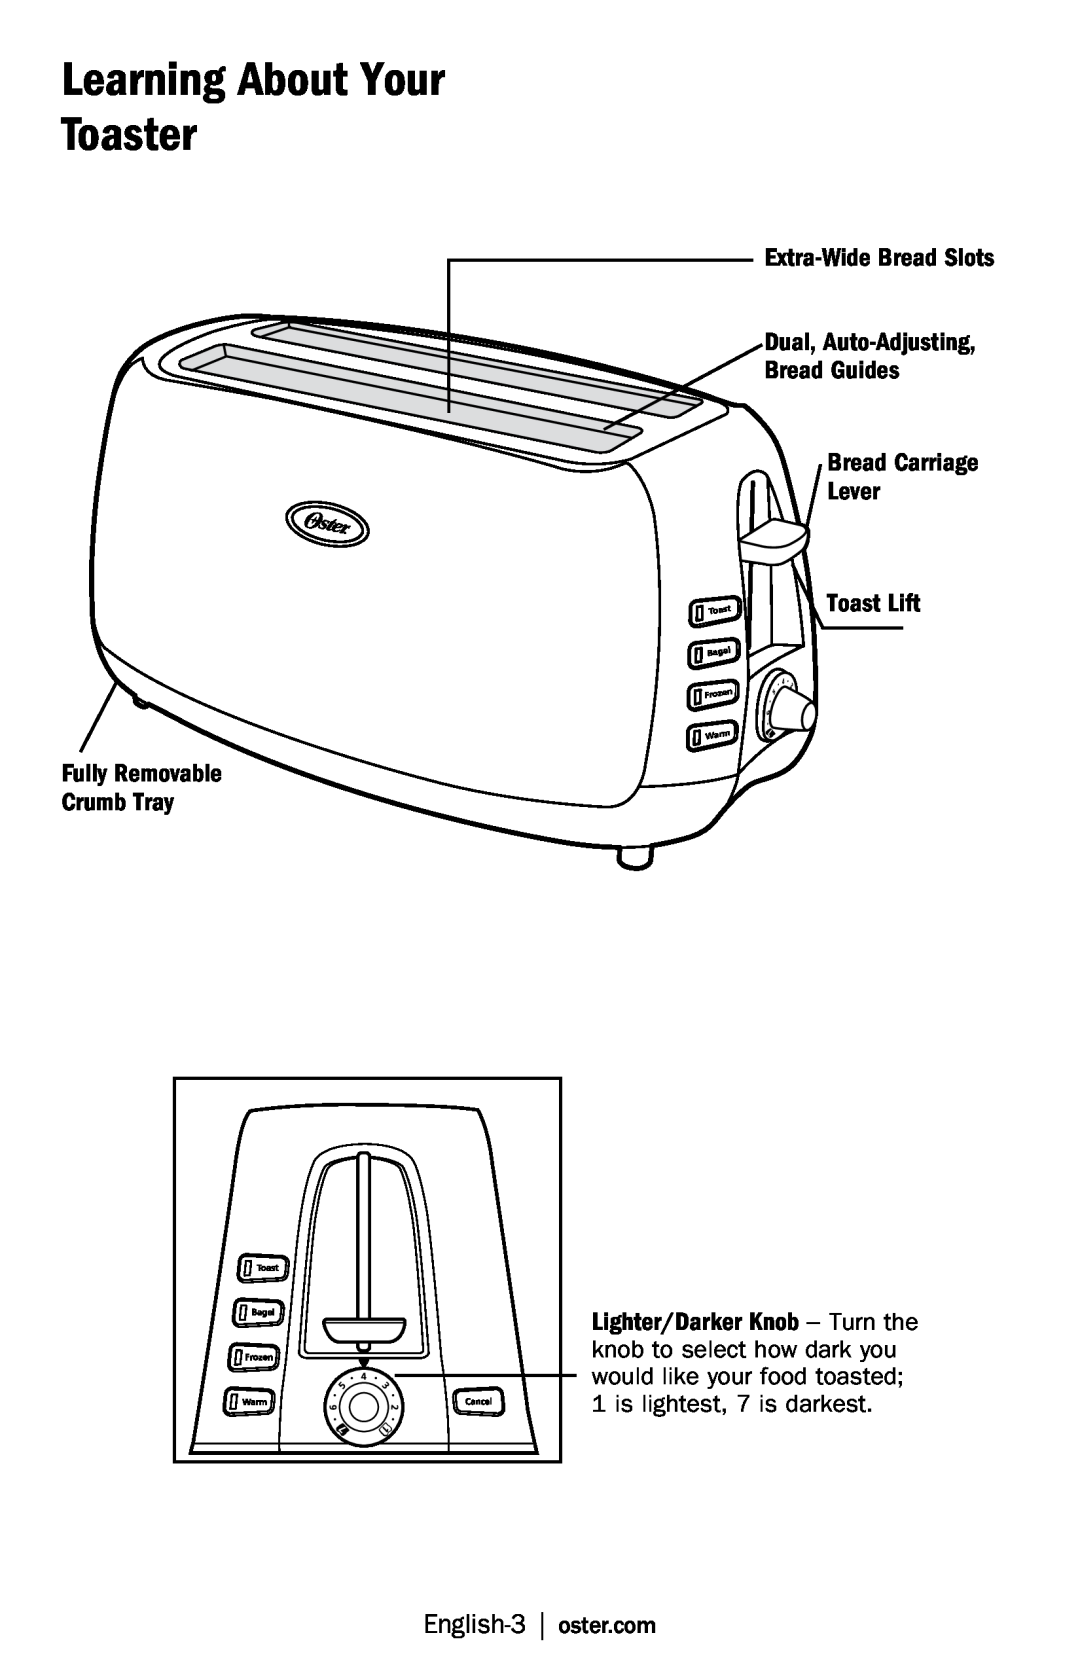 Oster TSSTJCPS01 Learning About Your Toaster, Extra-WideBread Slots Dual, Auto-Adjusting, Fully Removable Crumb Tray 